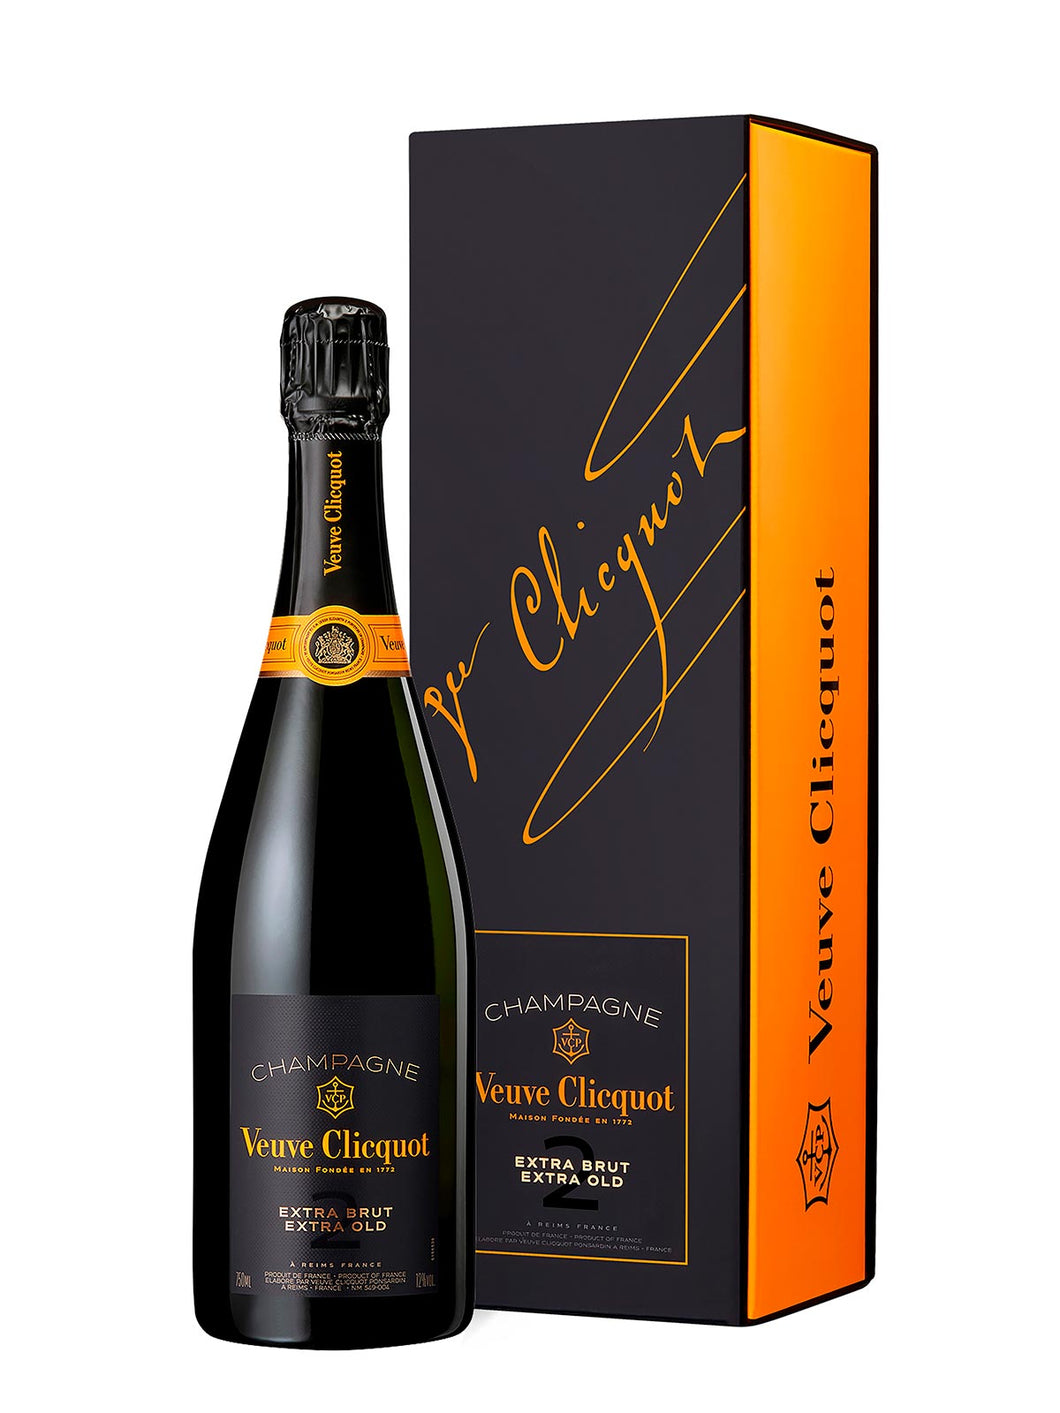 VEUVE CLICQUOT EXTRA BRUT EXTRA OLD GIFT BOX 75 cL 12 %